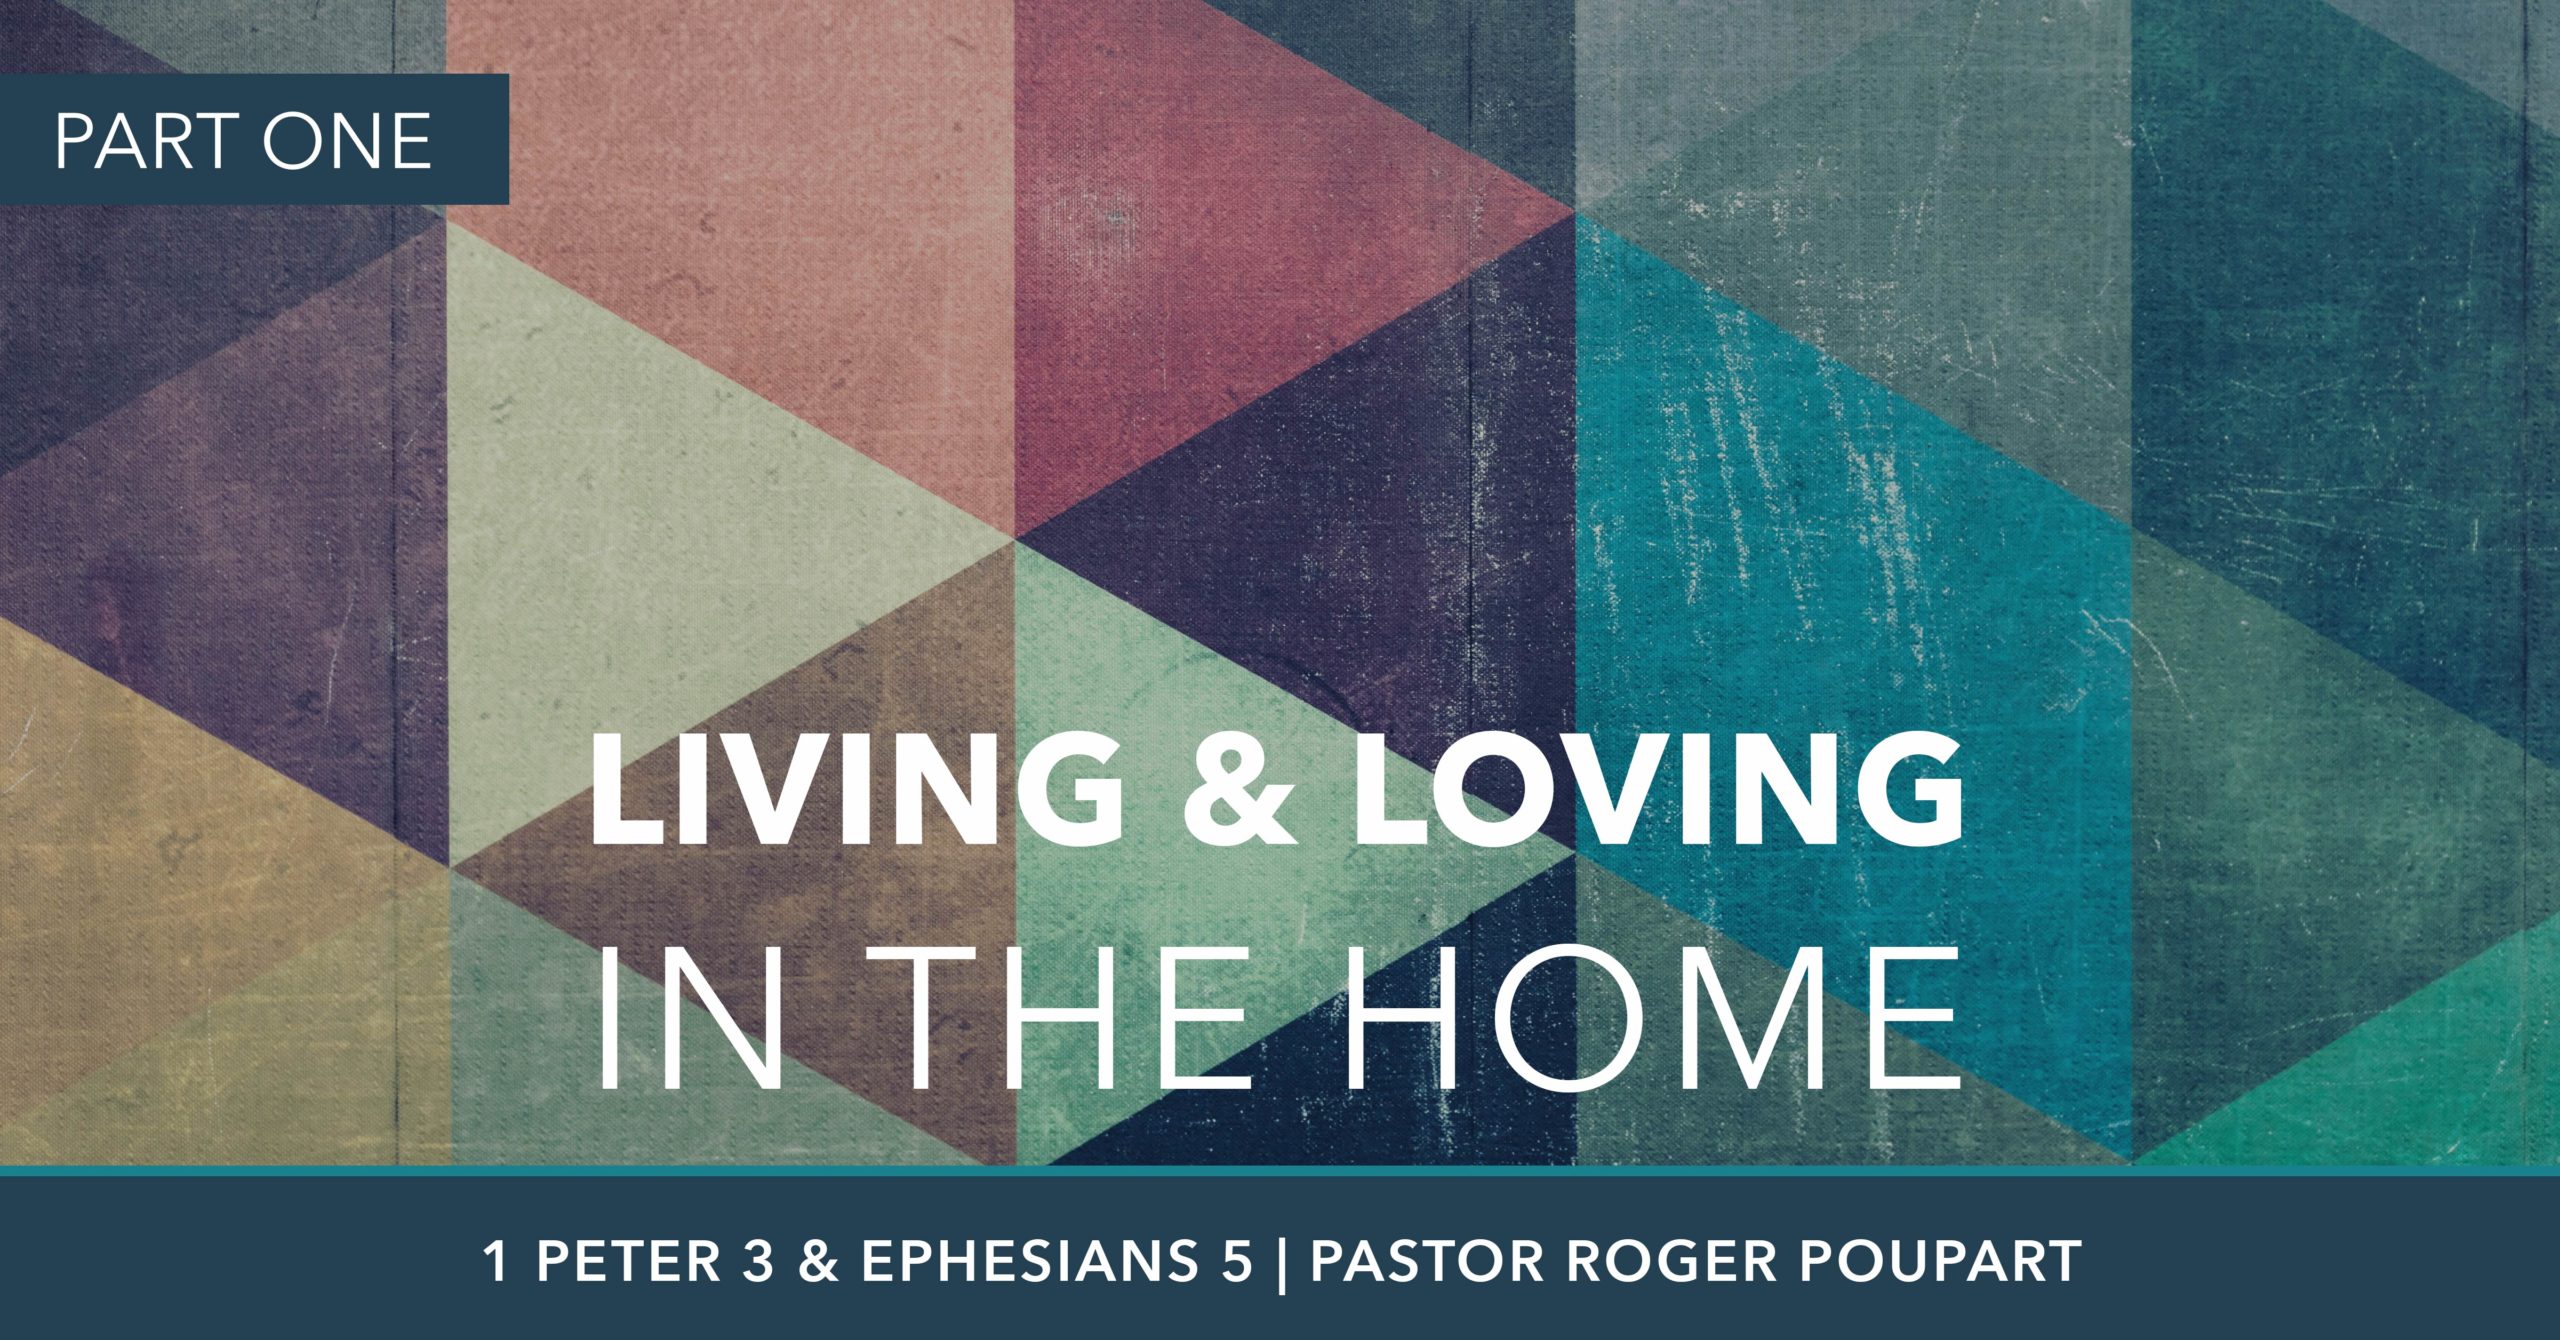 Living & Loving in the Home | Part One